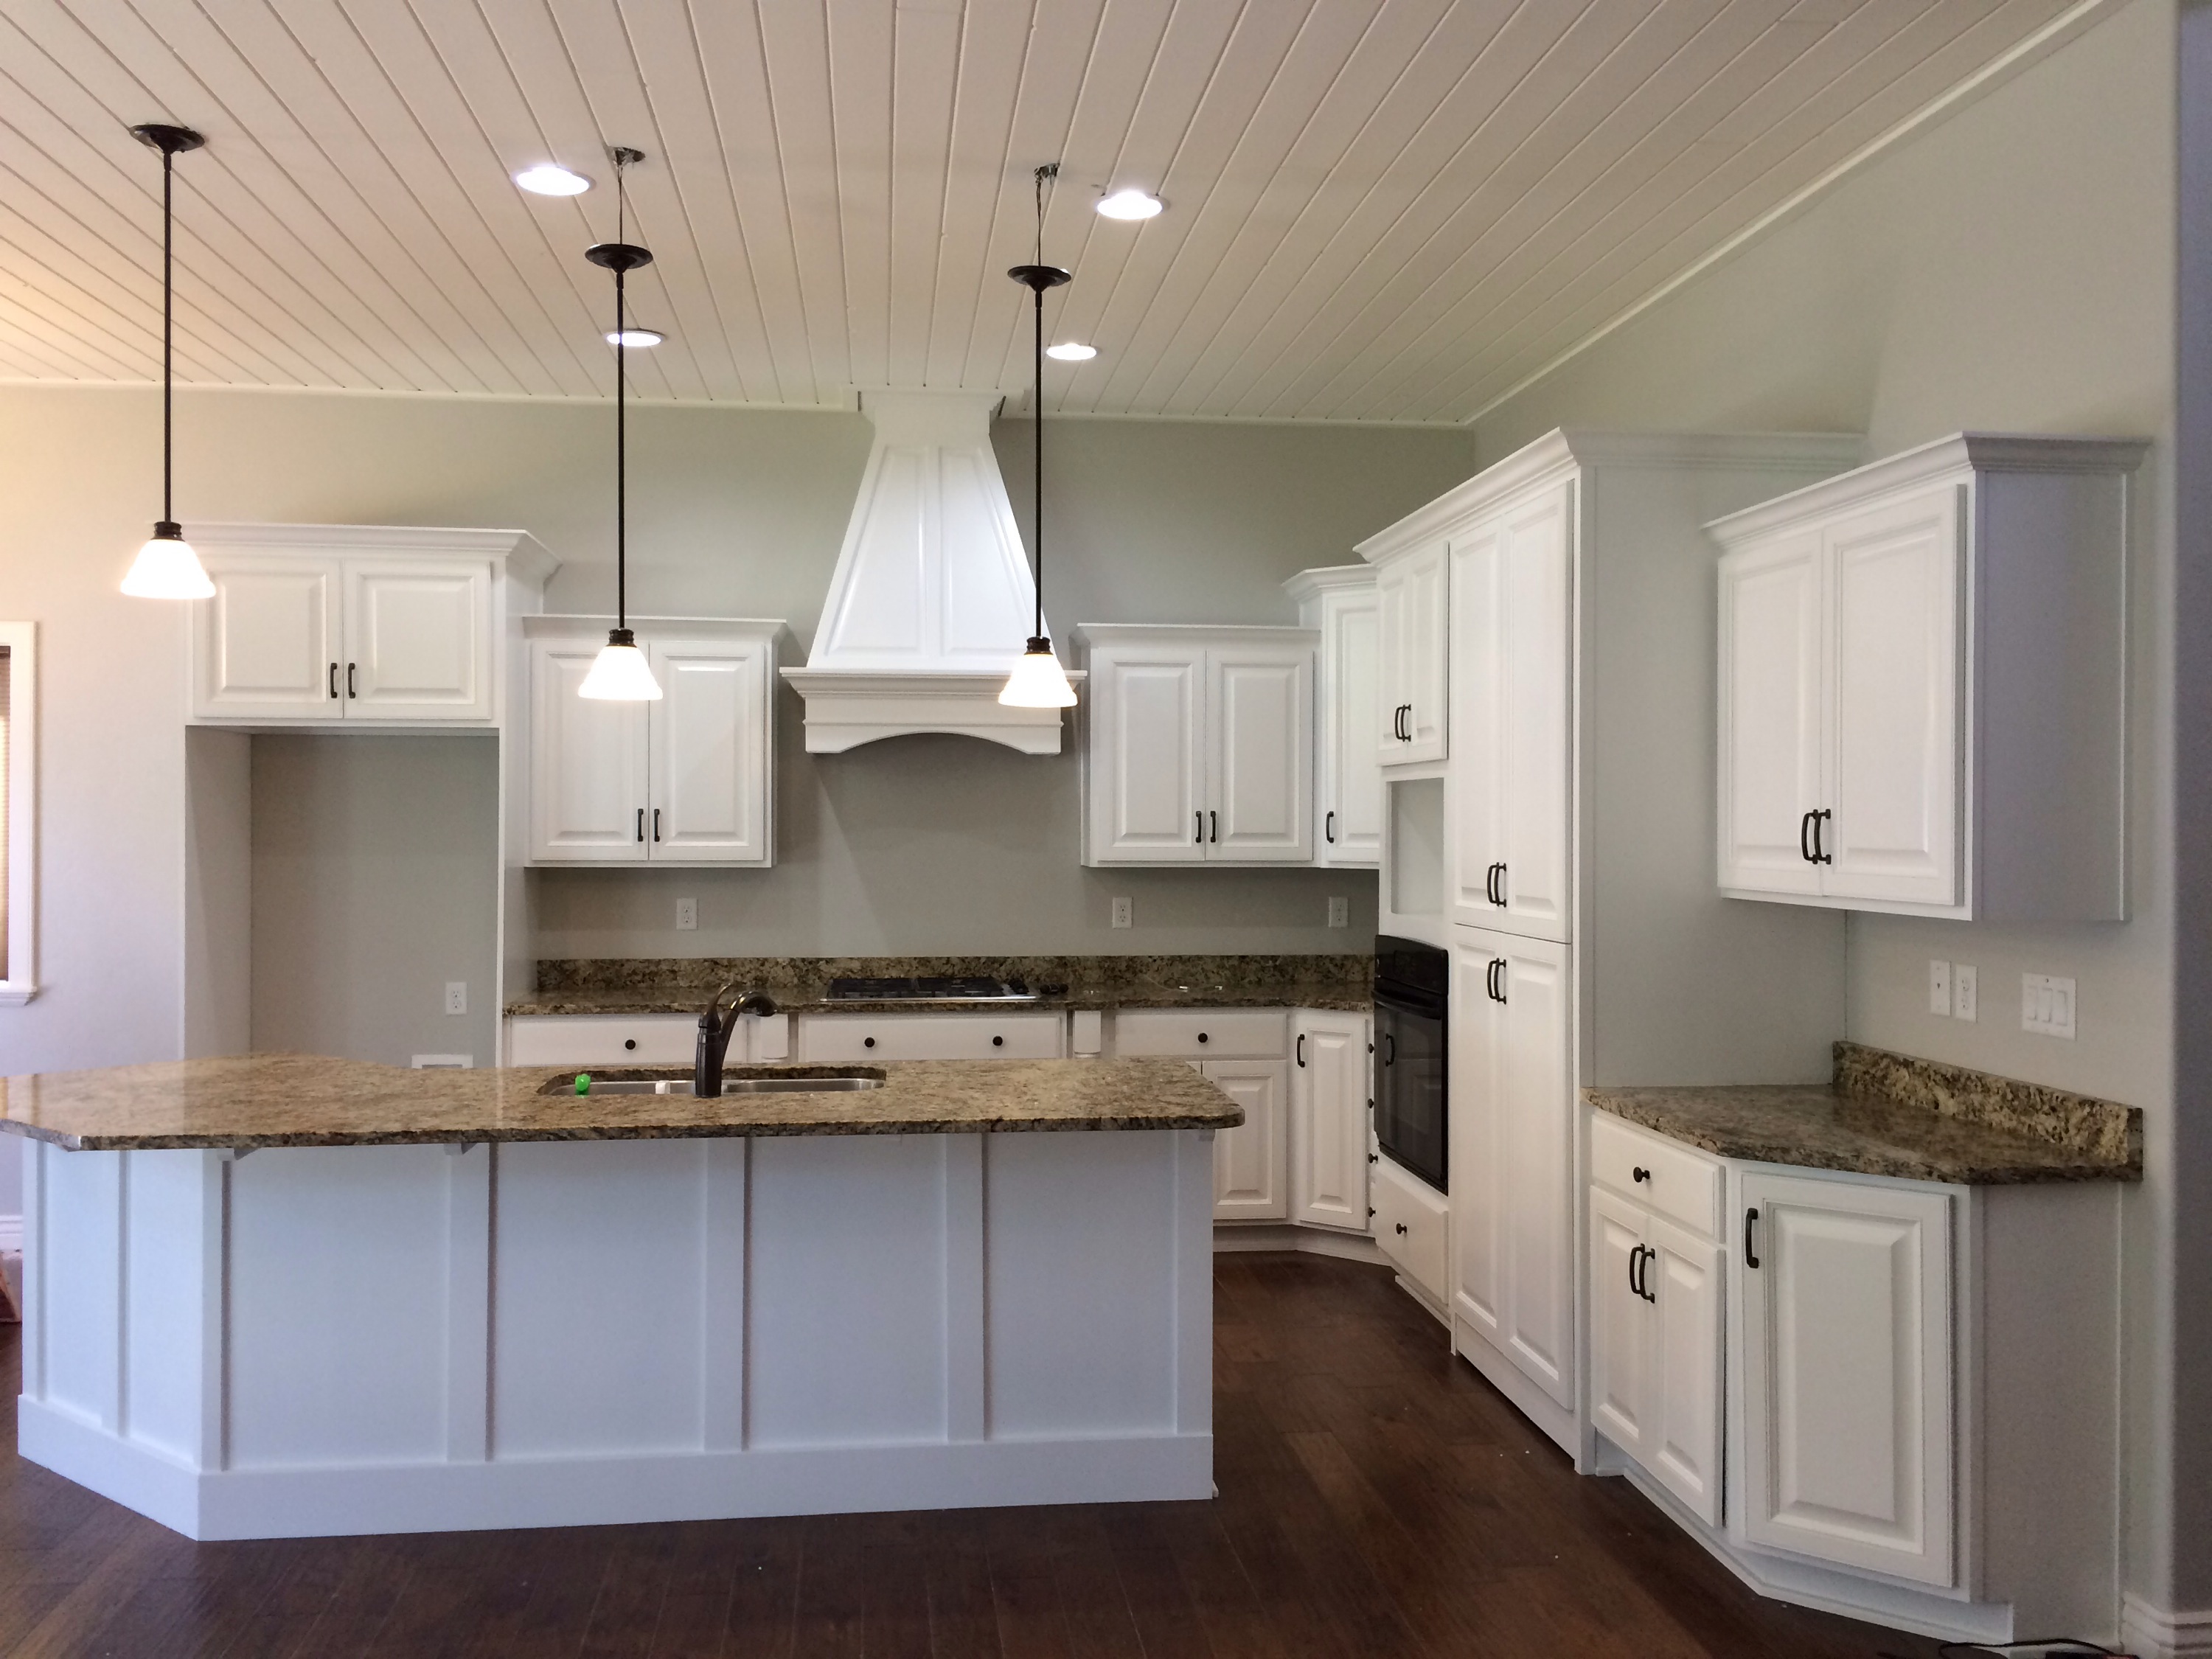 Knotty Alder Kitchen Cabinets After Being Refinished In White